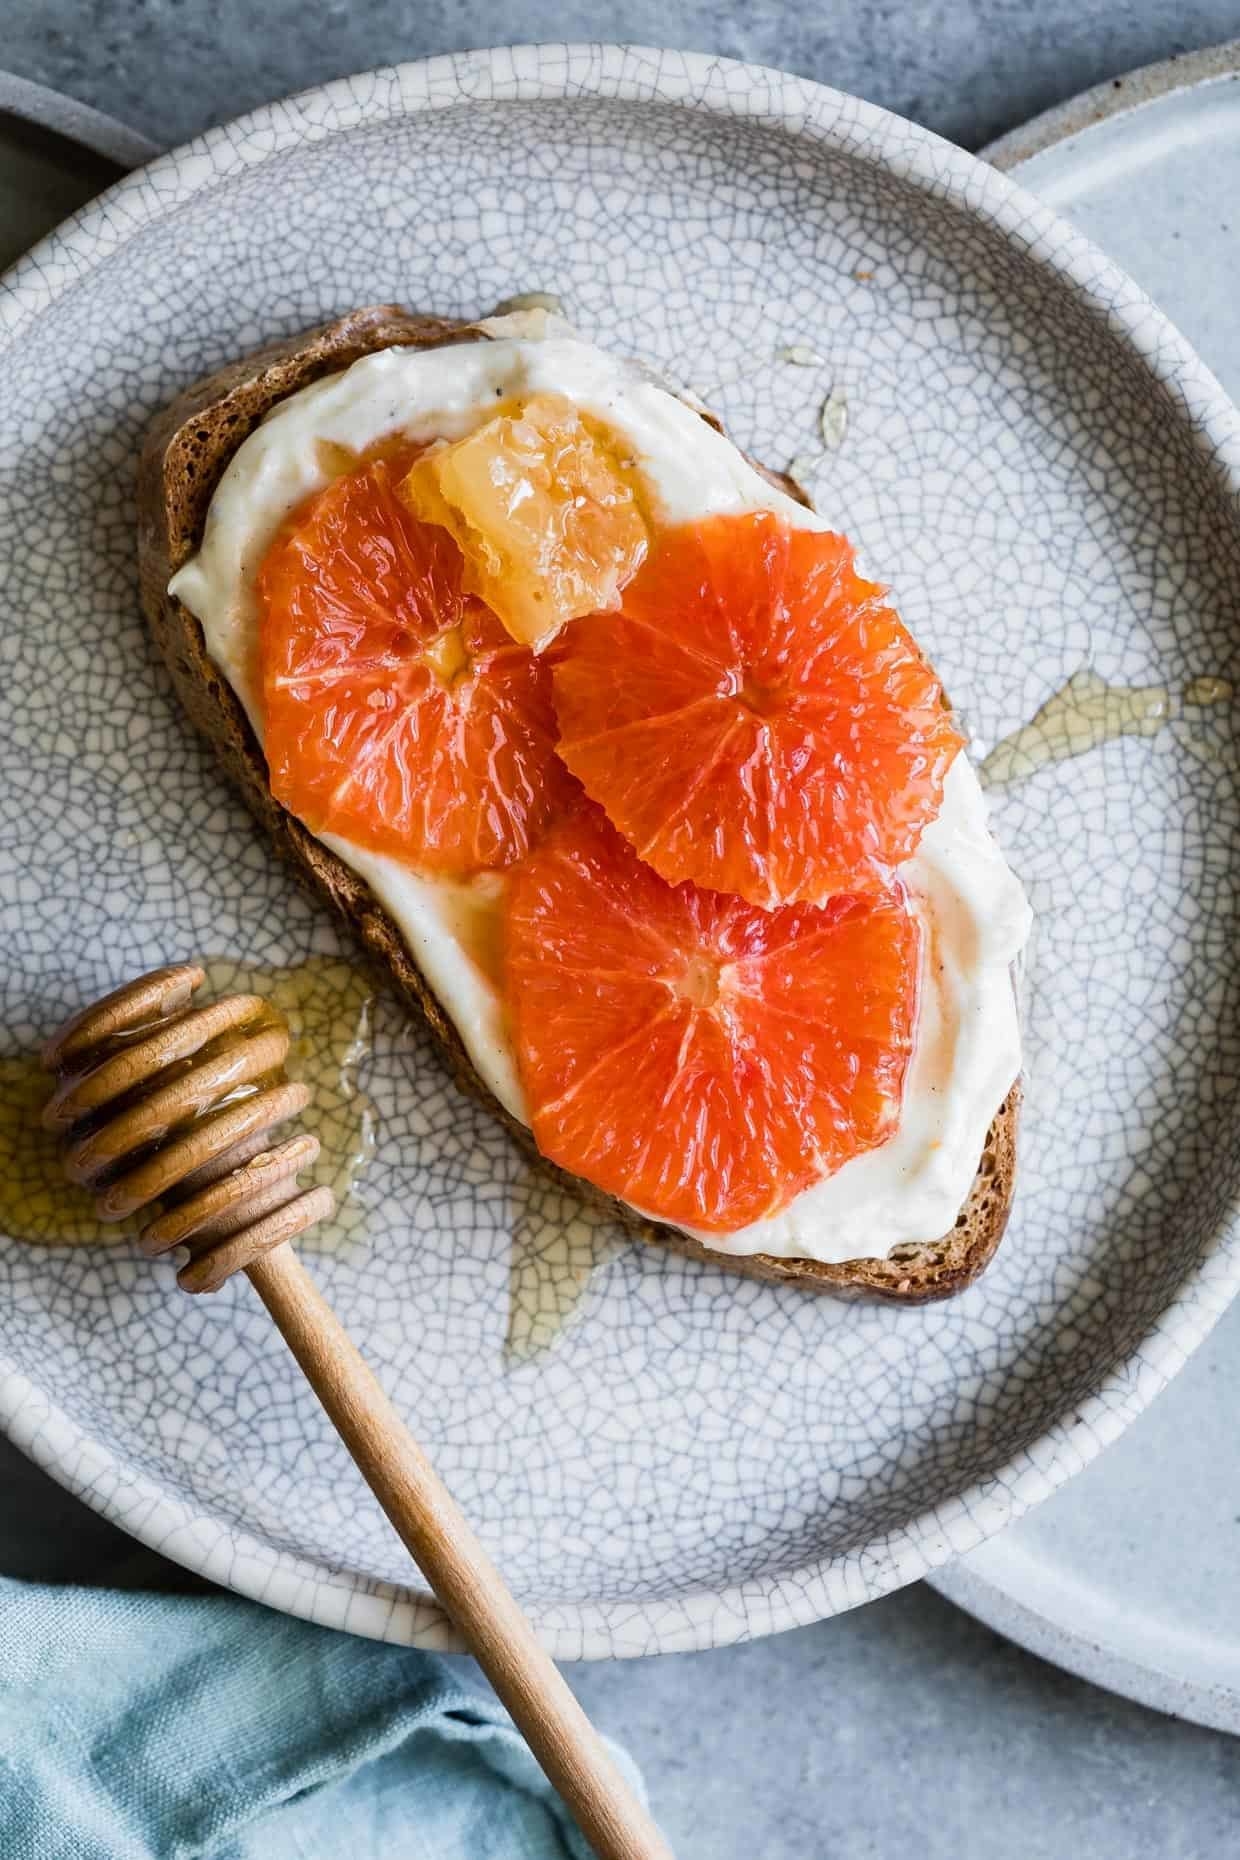 A slice of toast topped with ricotta, honey, and sliced orange.